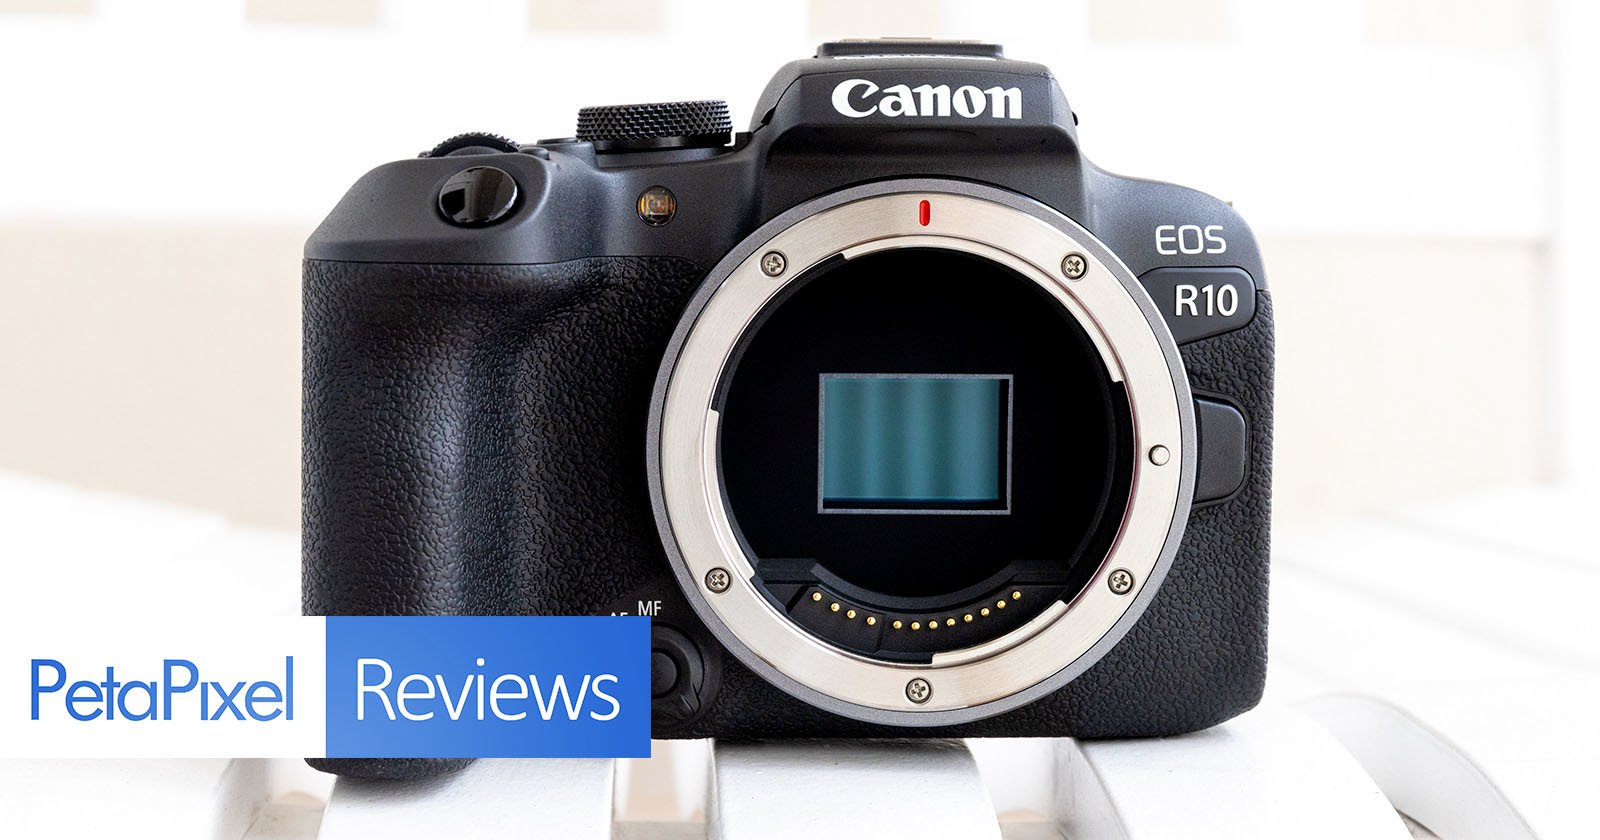  canon eos r10 first impressions lot camera 